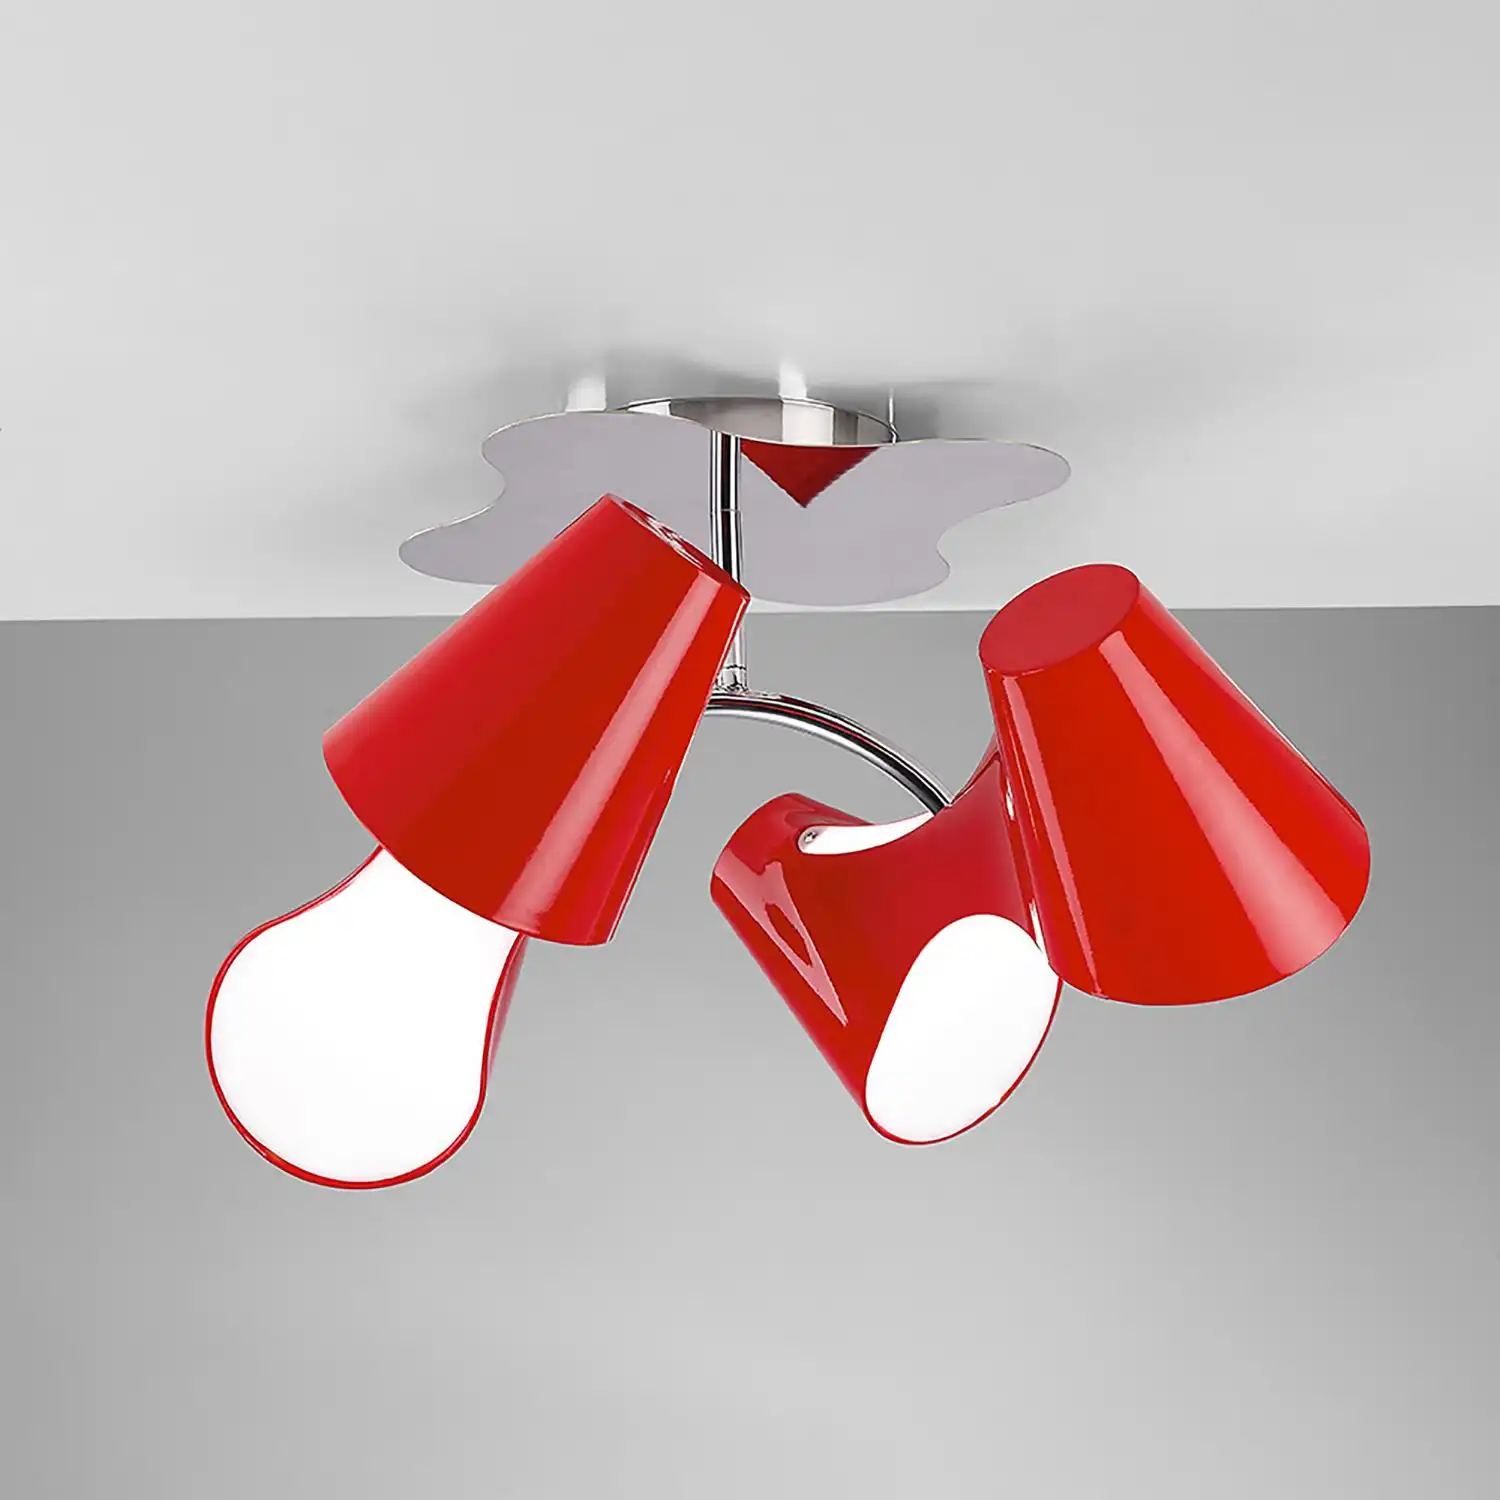 Ora Ceiling 2 Arm 4 Light E27, Gloss Red White Acrylic Polished Chrome, CFL Lamps INCLUDED